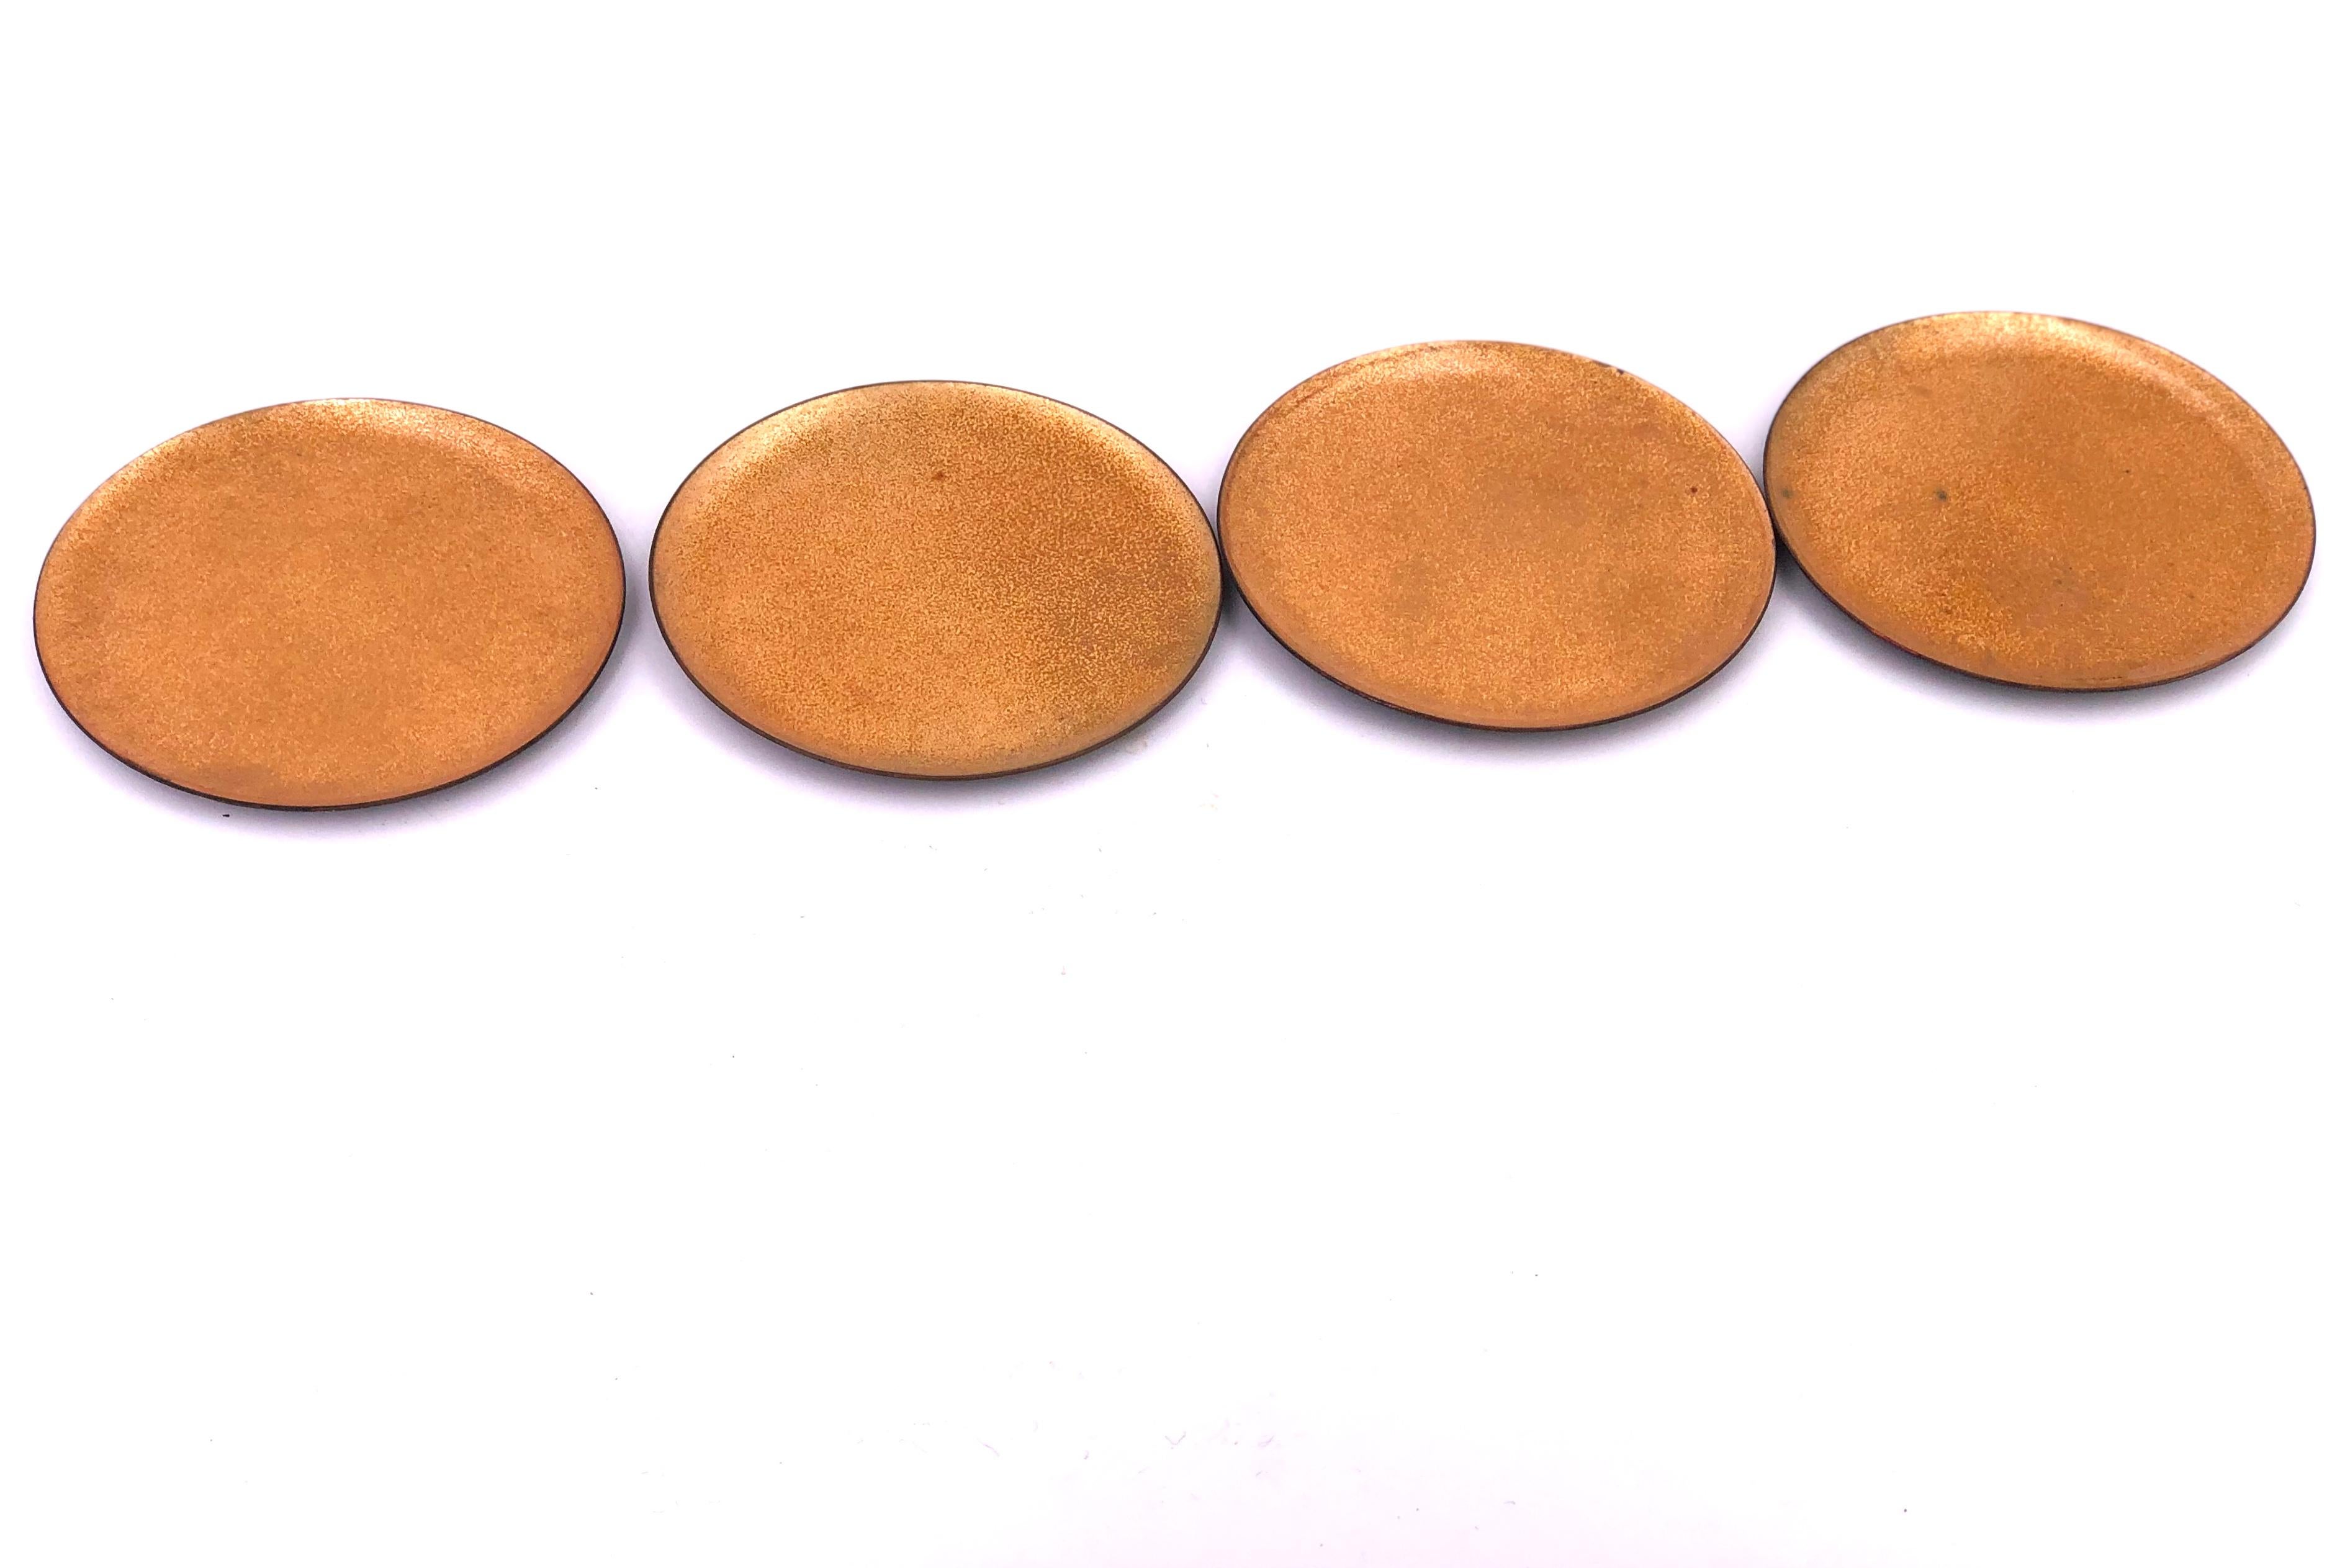 American Set of 6 Enameled on Copper Gold Coasters Midcentury California Design